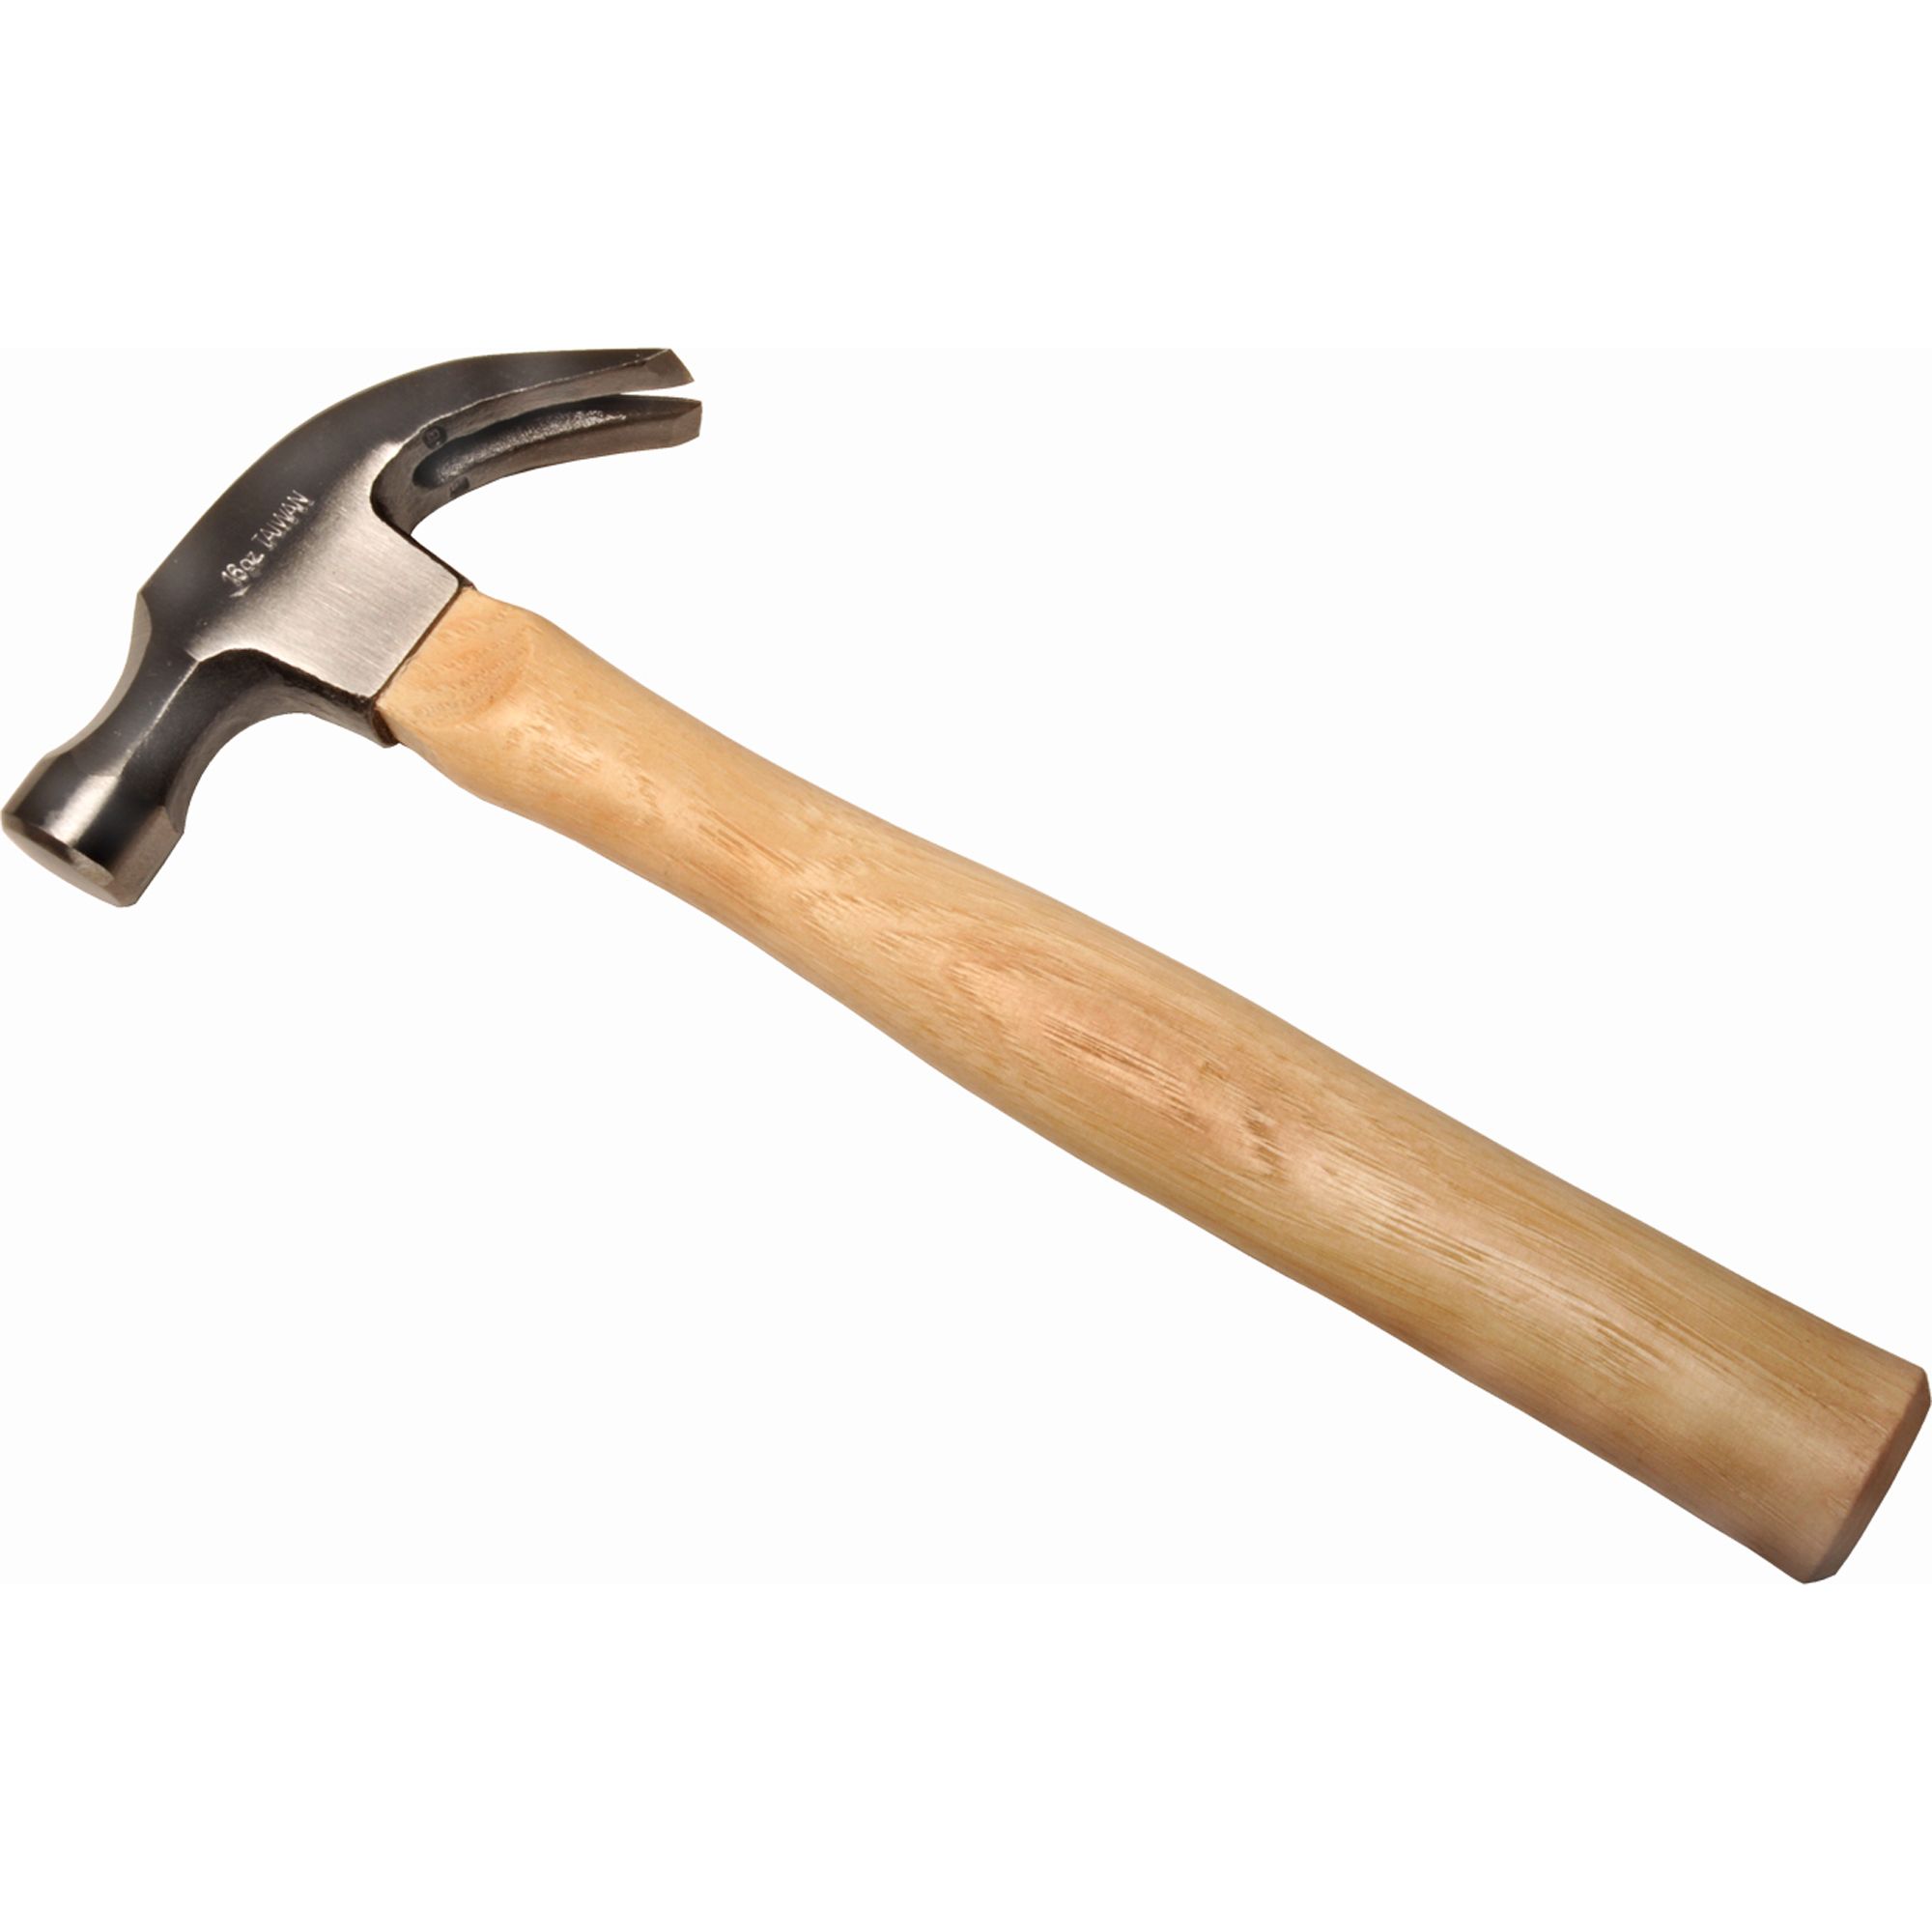 16-oz Curved Claw Hammer with Hickory Handle